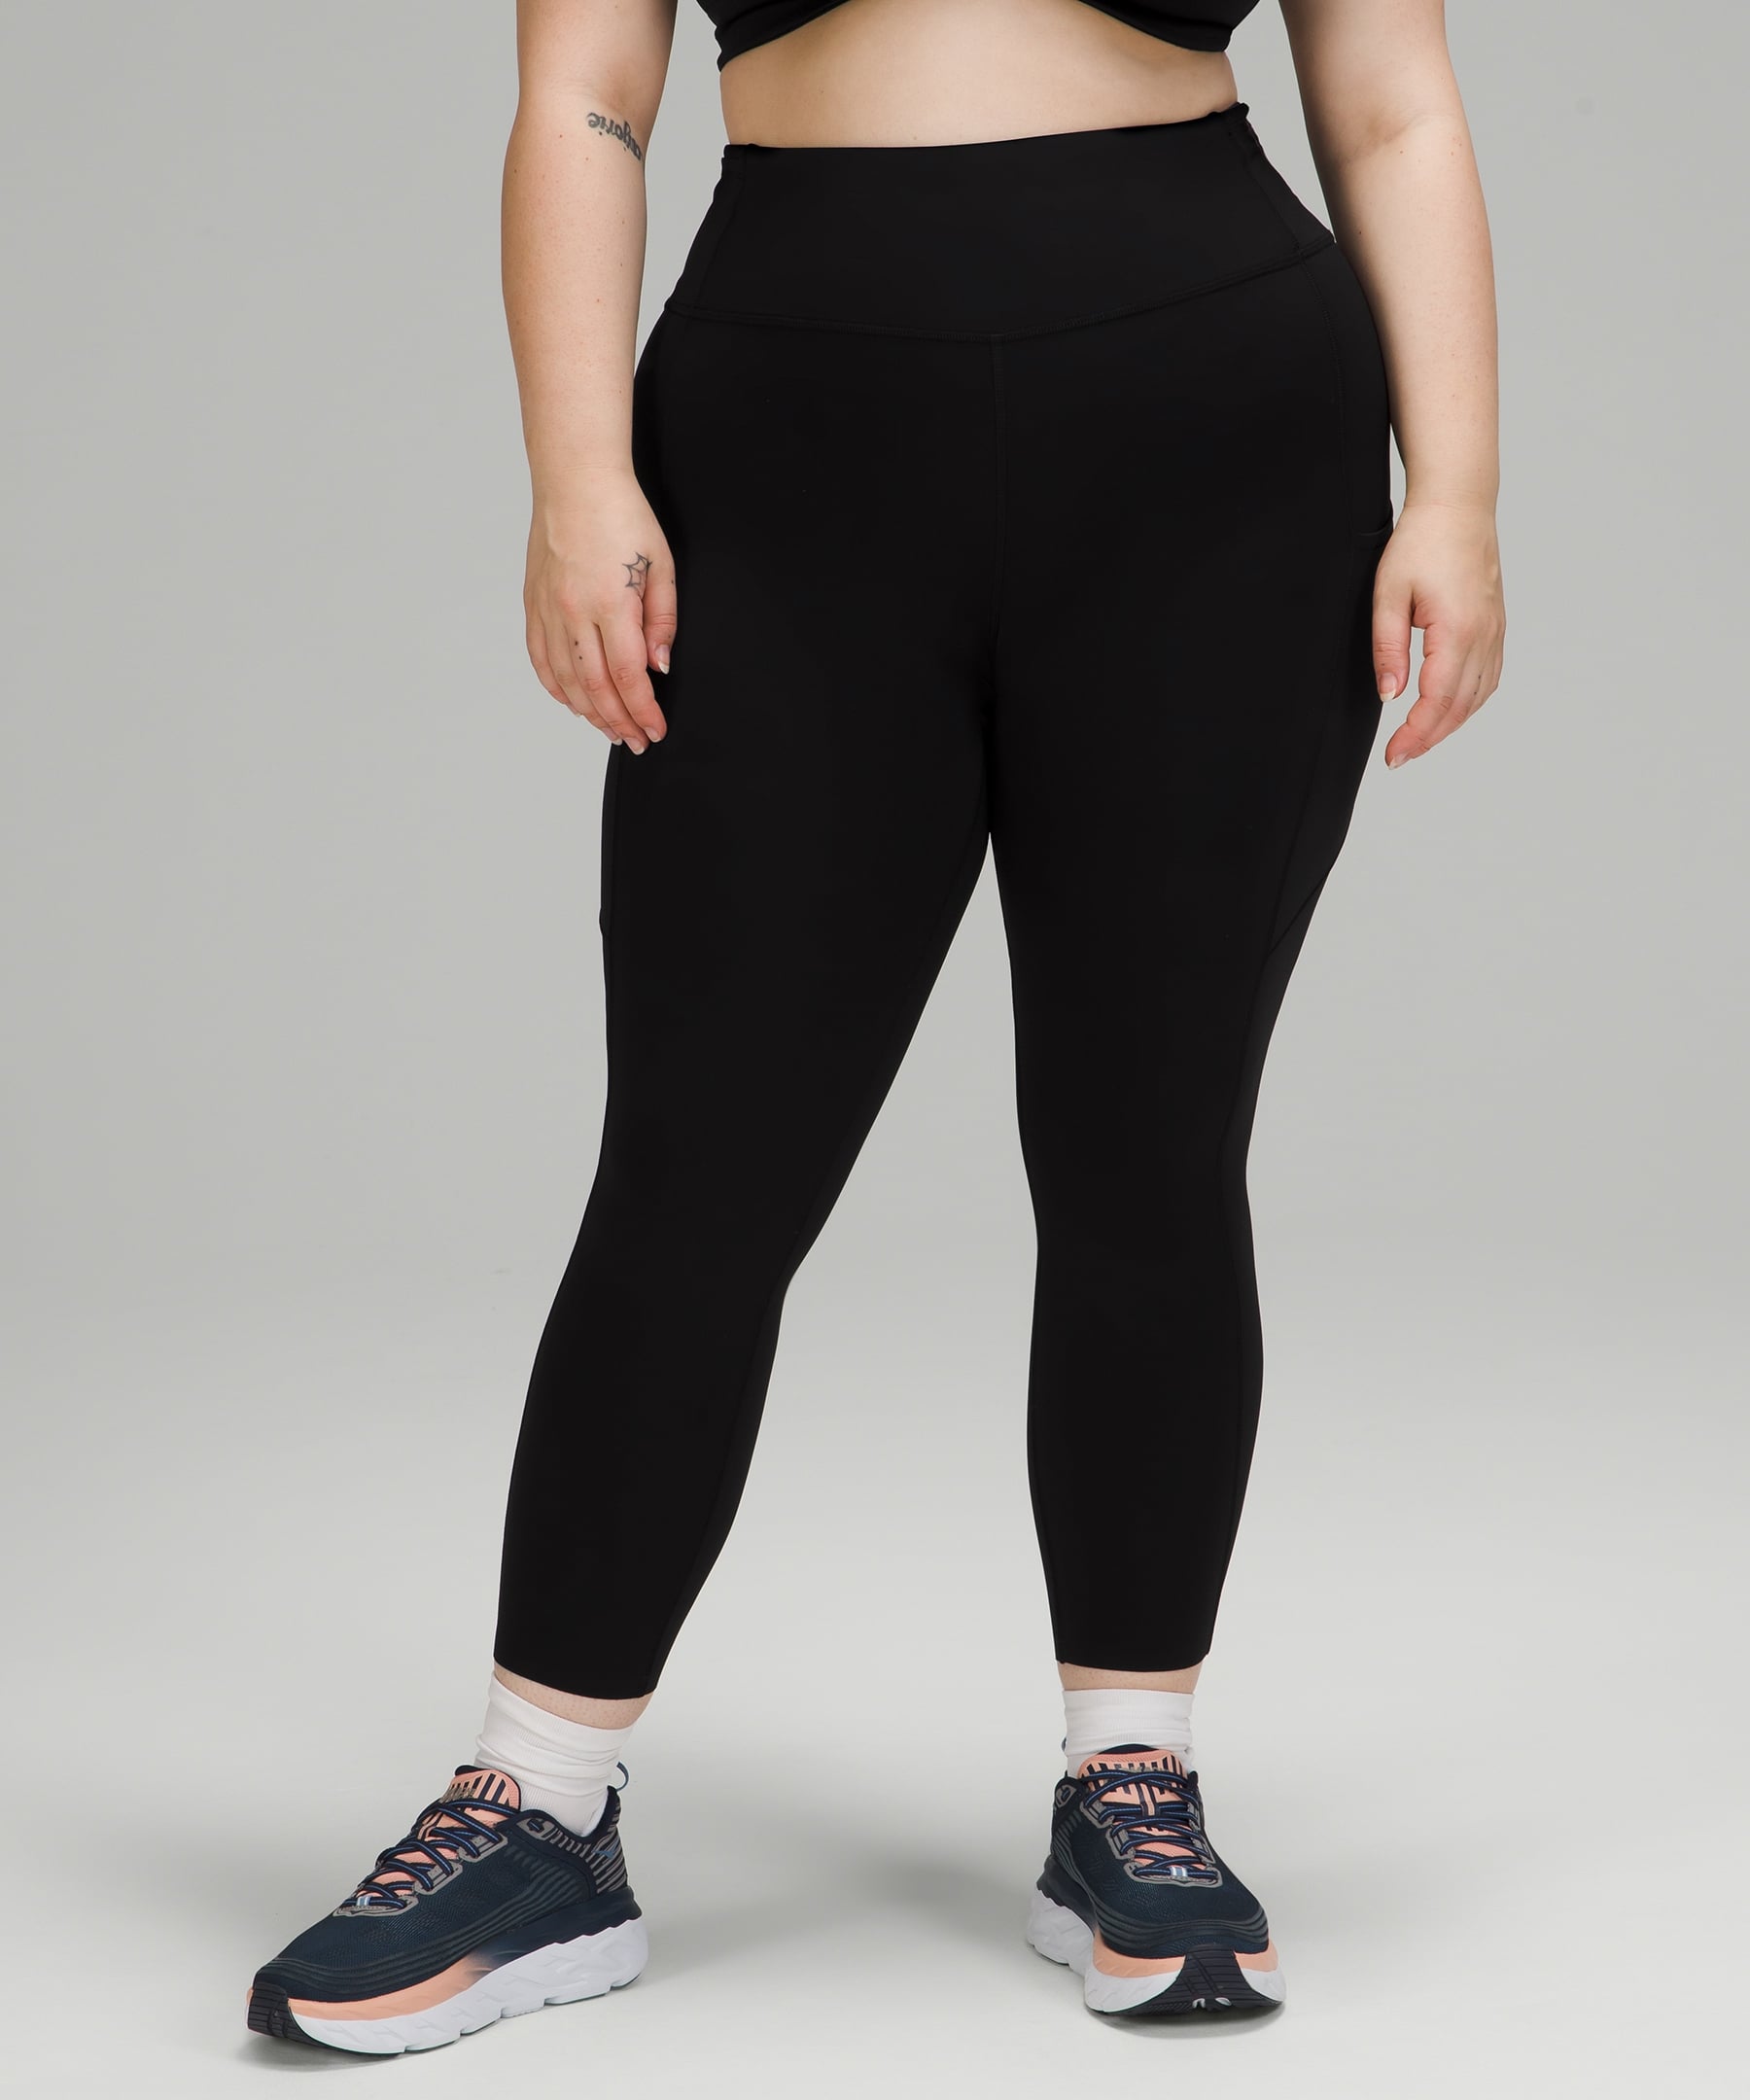 Are these tights great as a gift to a girlfriend? Or do you guys have  better recommendations? Please help it's my first time shopping for  Lululemon but heard she loves the brand 